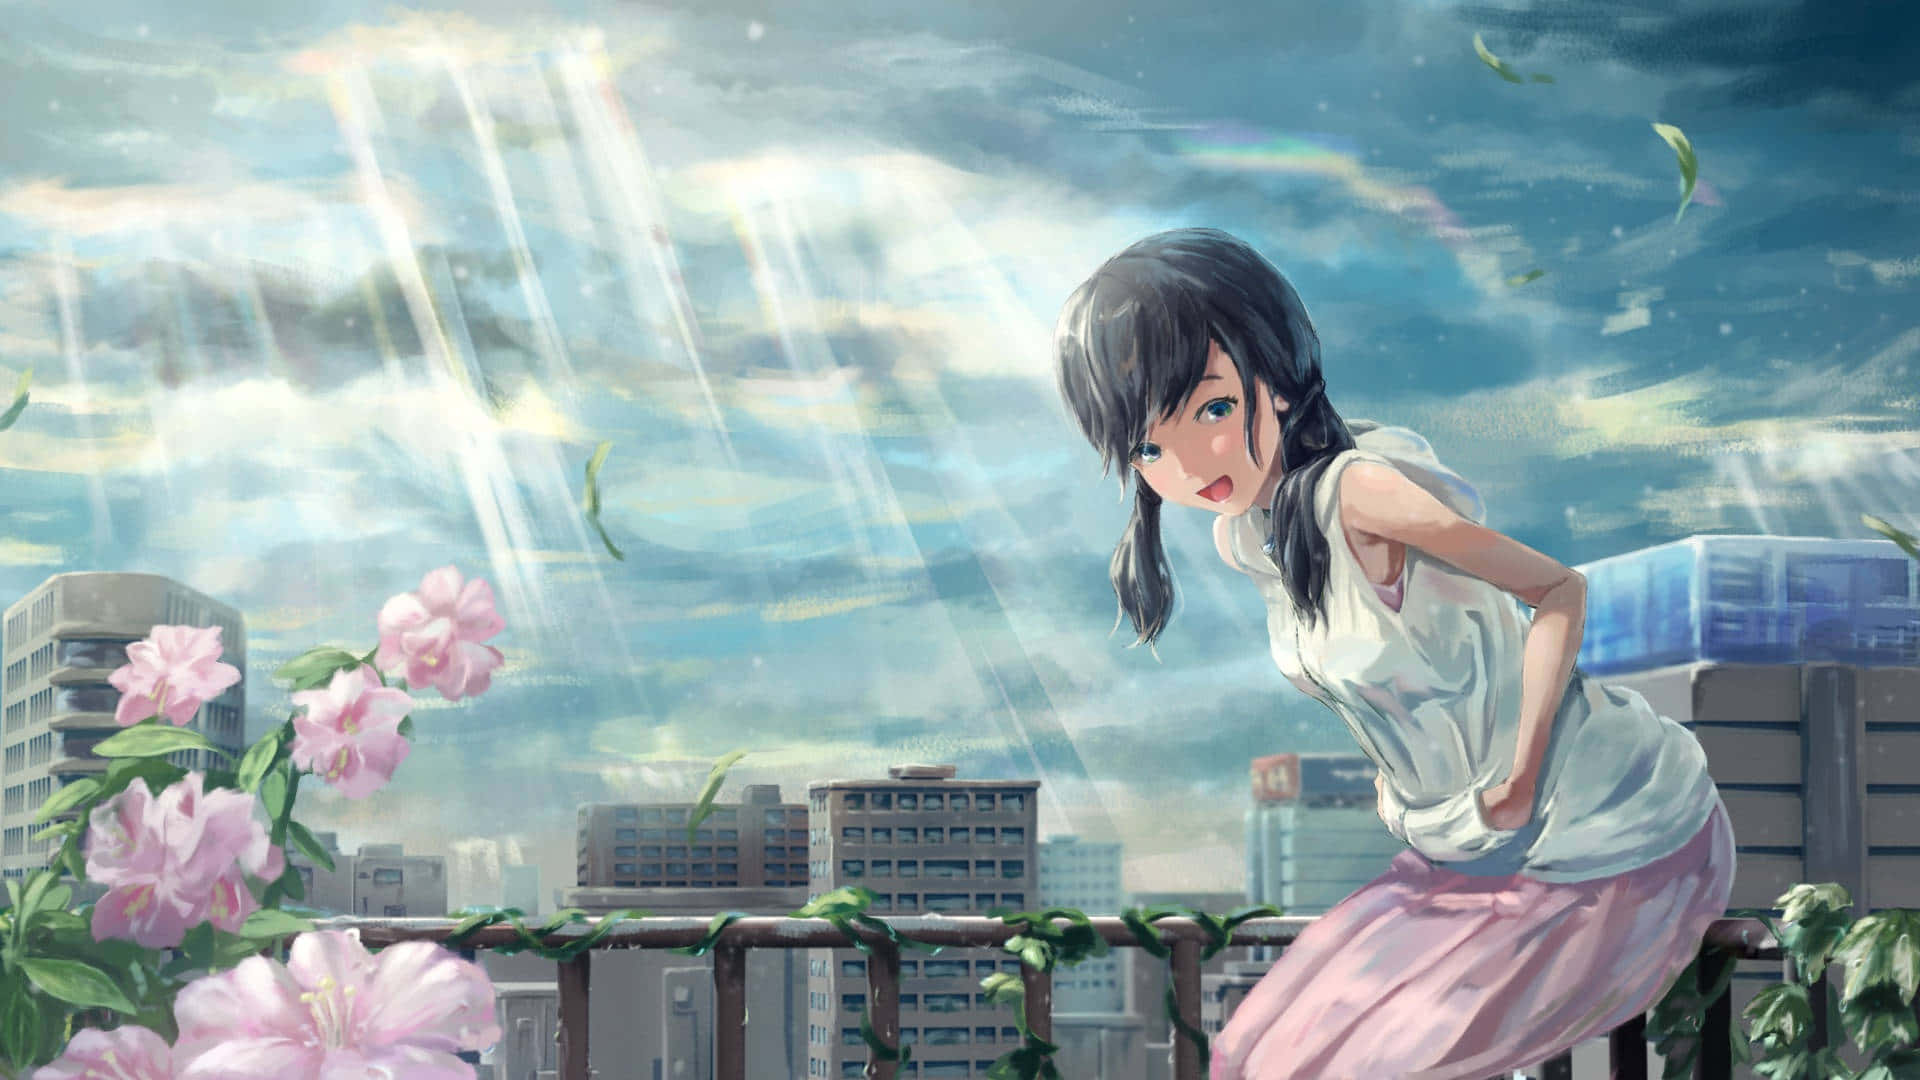 Romantic Scene from Weathering With You Anime Movie